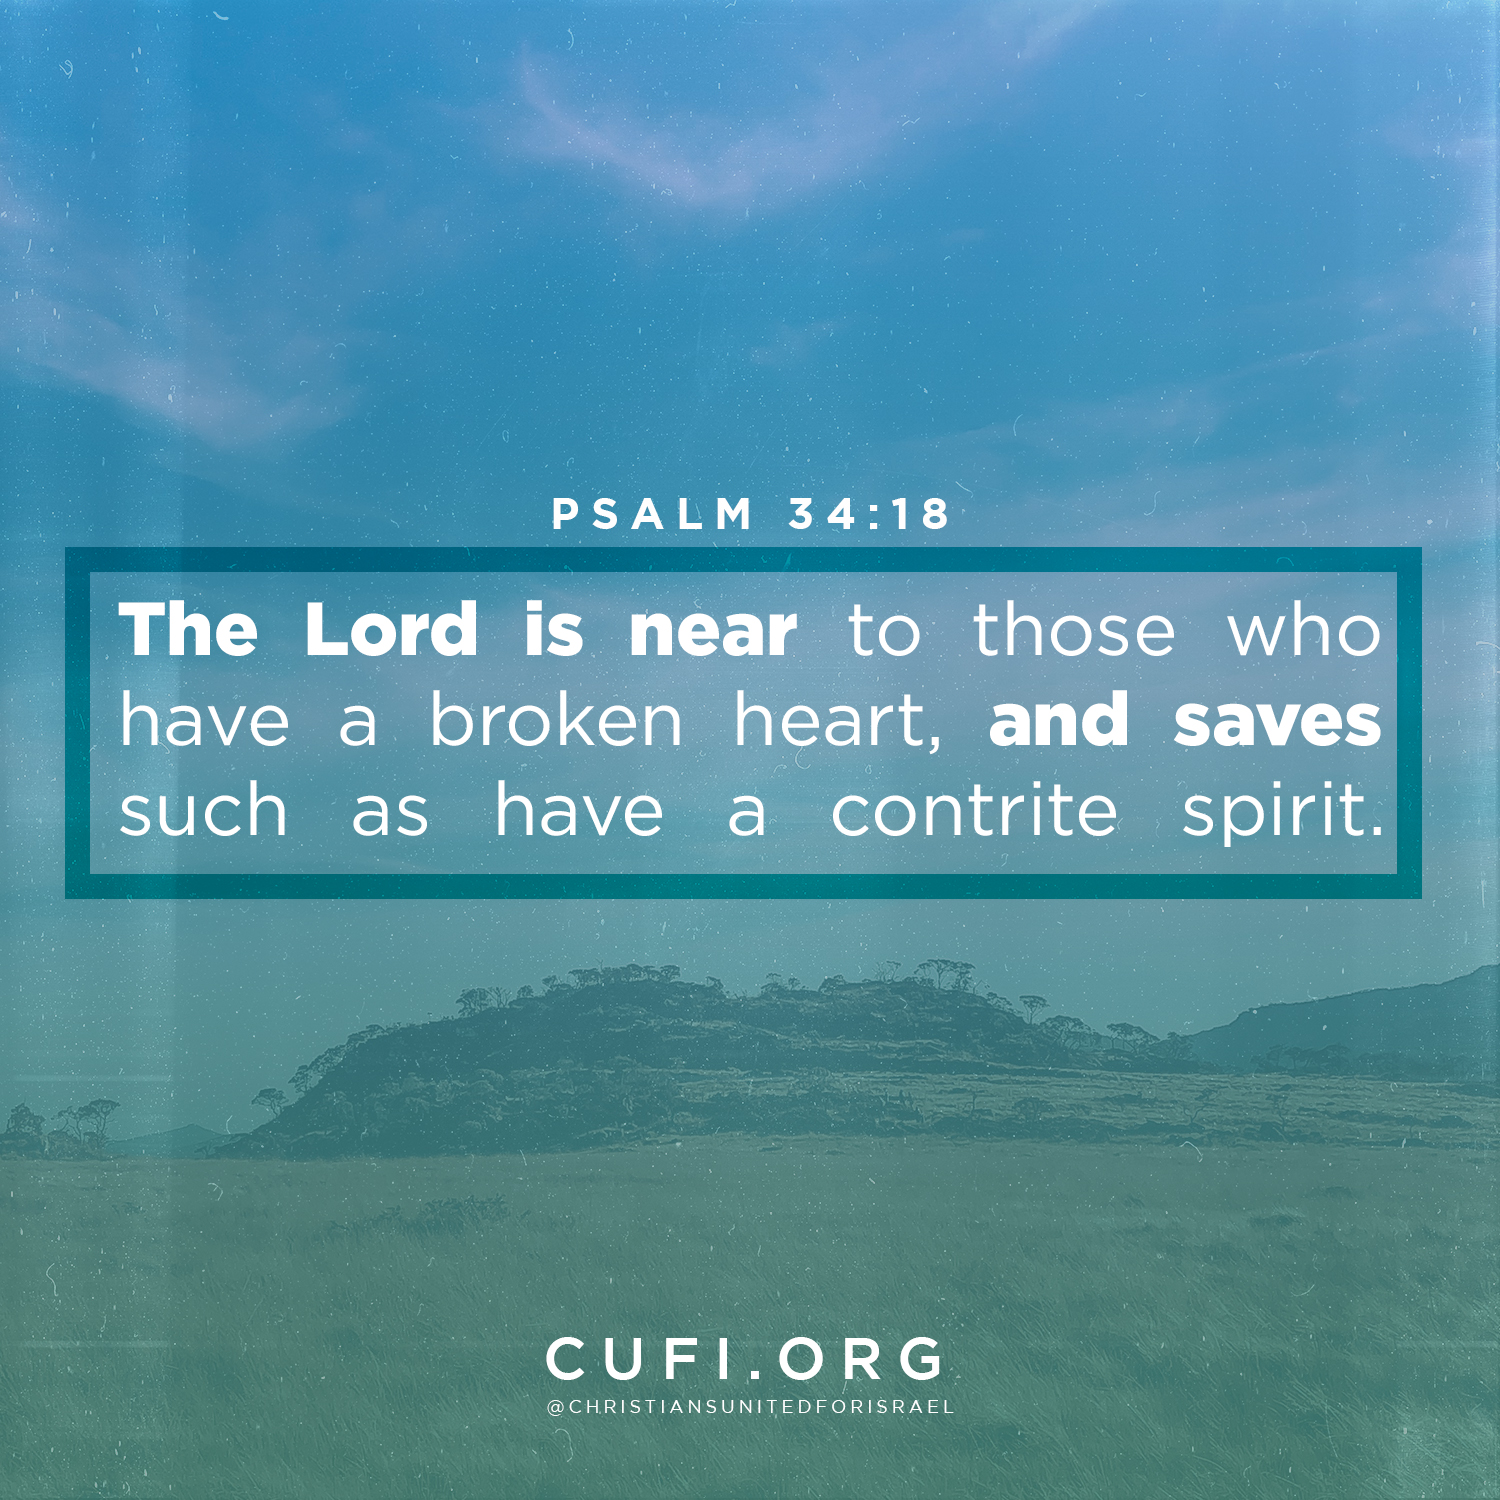 'PSALM 34:18 is The Lord near to those who have a eeeen heart, and saves such a contrite spirit. as have CUFI.ORG @CHRISTIANSUNITEDFORISRAEL'